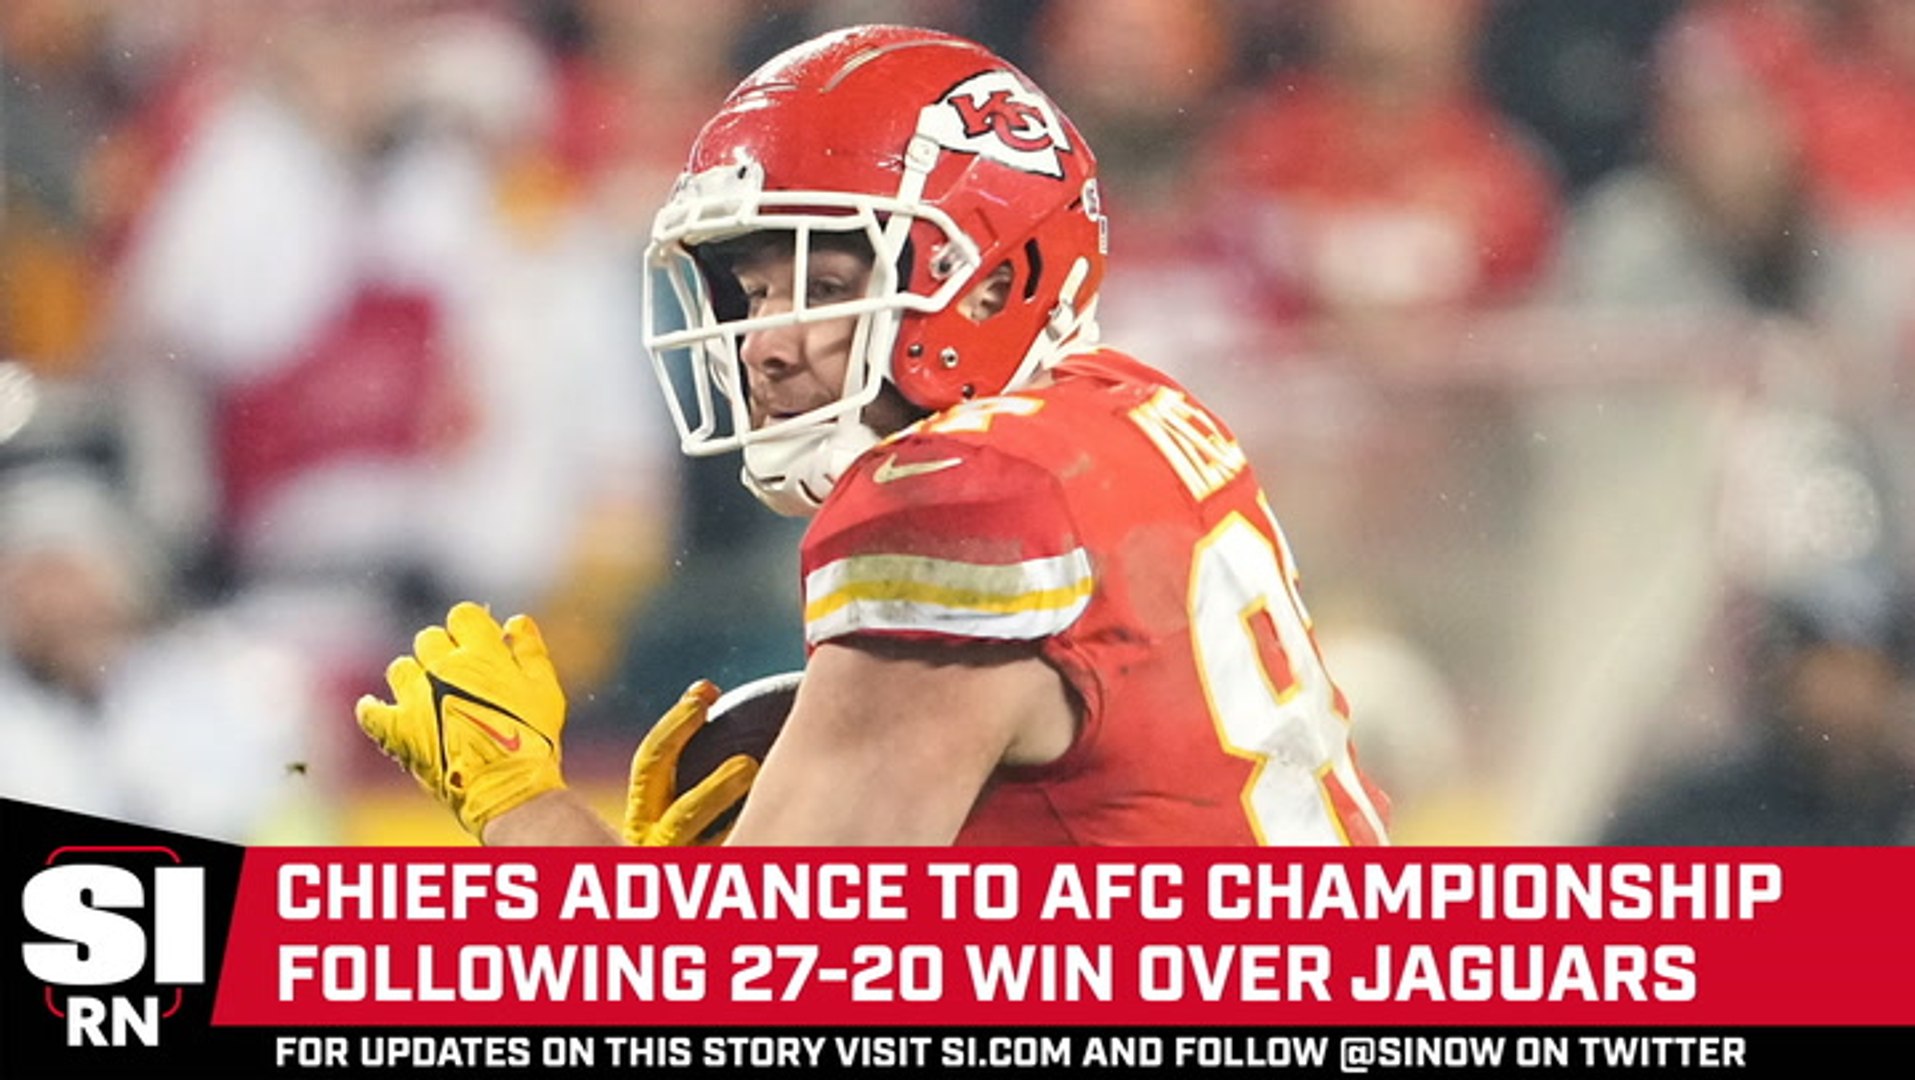 Chiefs beat Jaguars, advance to 5th straight AFC Championship